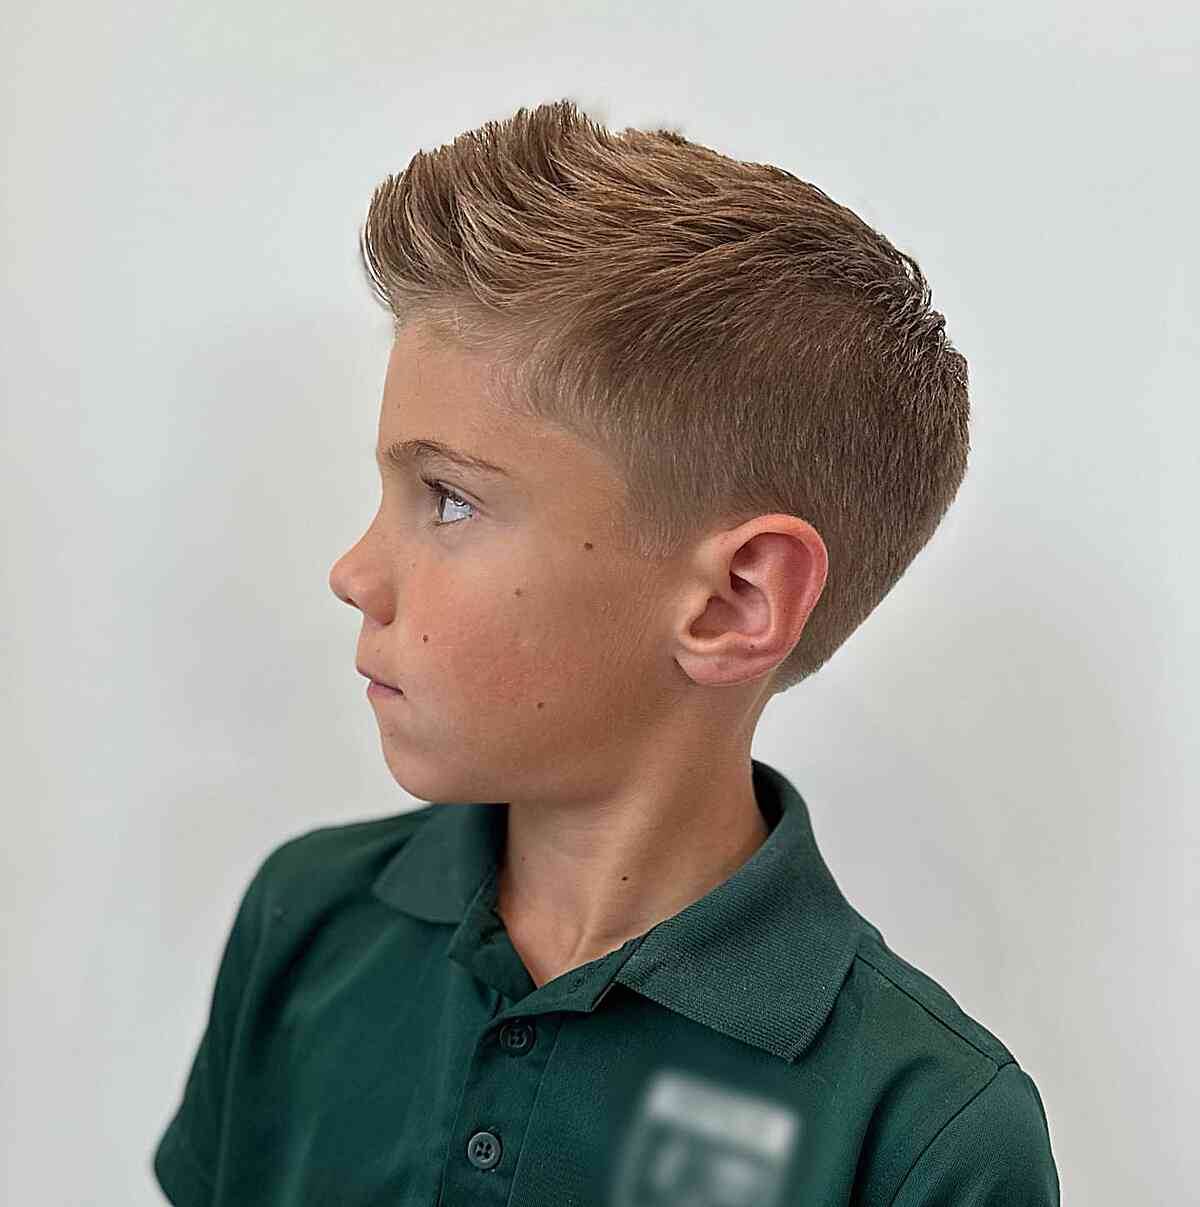 64 Coolest Boys Haircuts for School in 2023